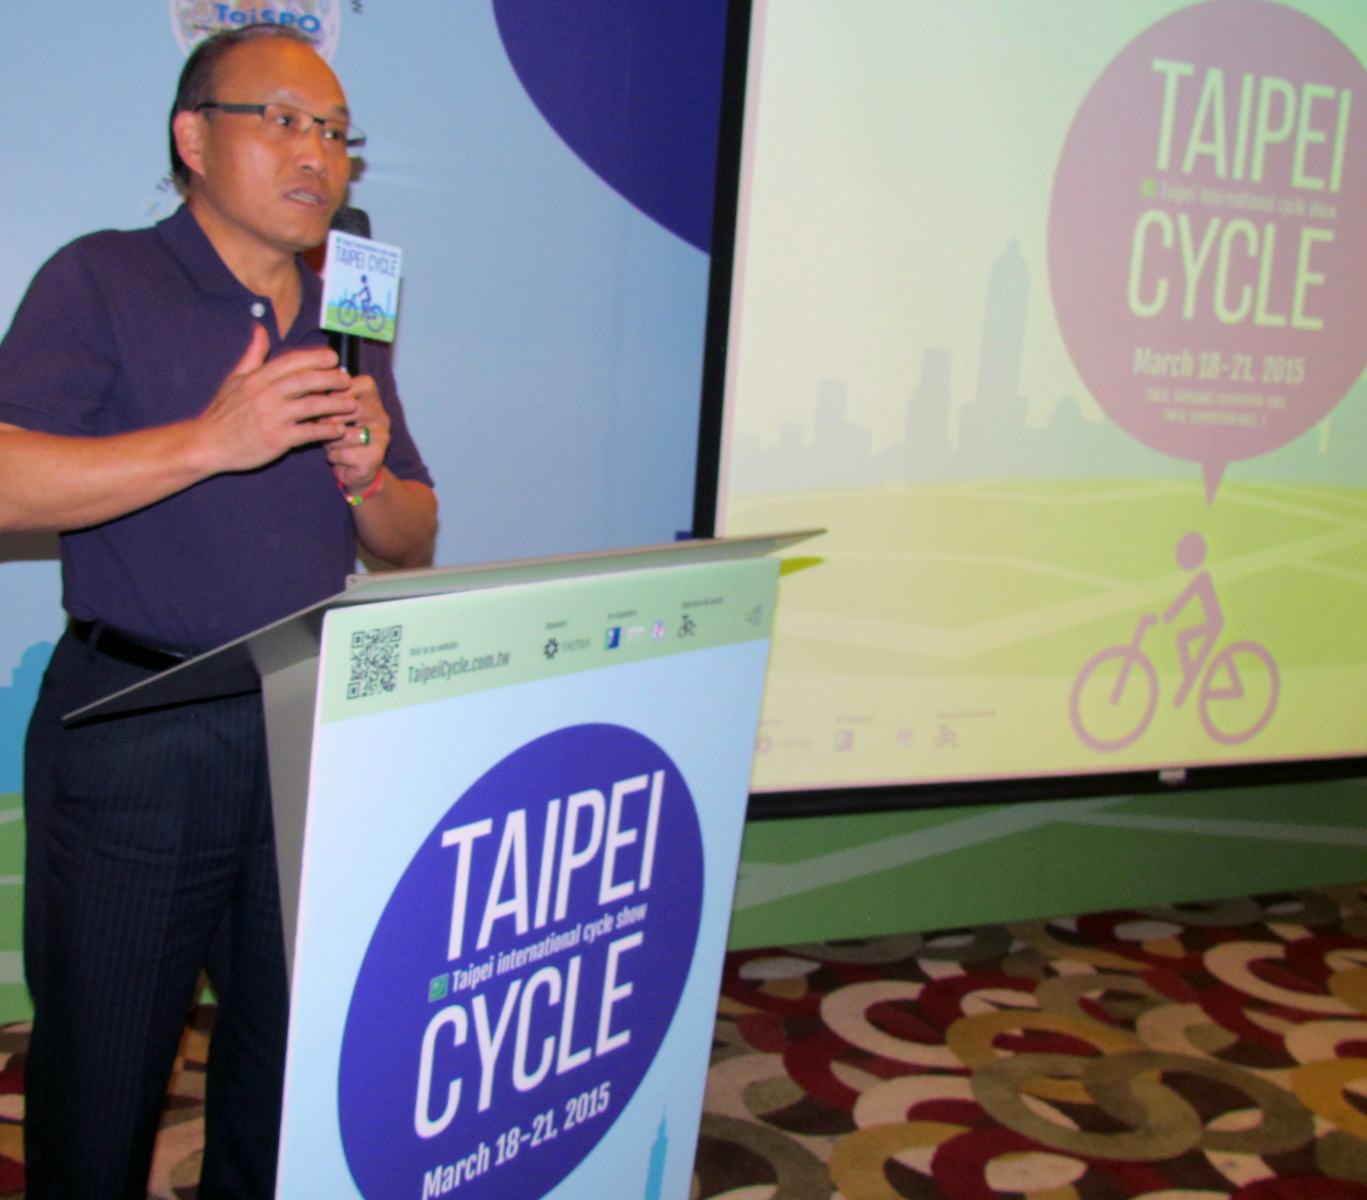 Peter Huang CEO of show organizer TAITRA announced that up to now 1,100 exhibitors have registered for the 28th Taipei International Cycle Show which takes place from March 18 to 21, 2015. – Photo Bike Europe